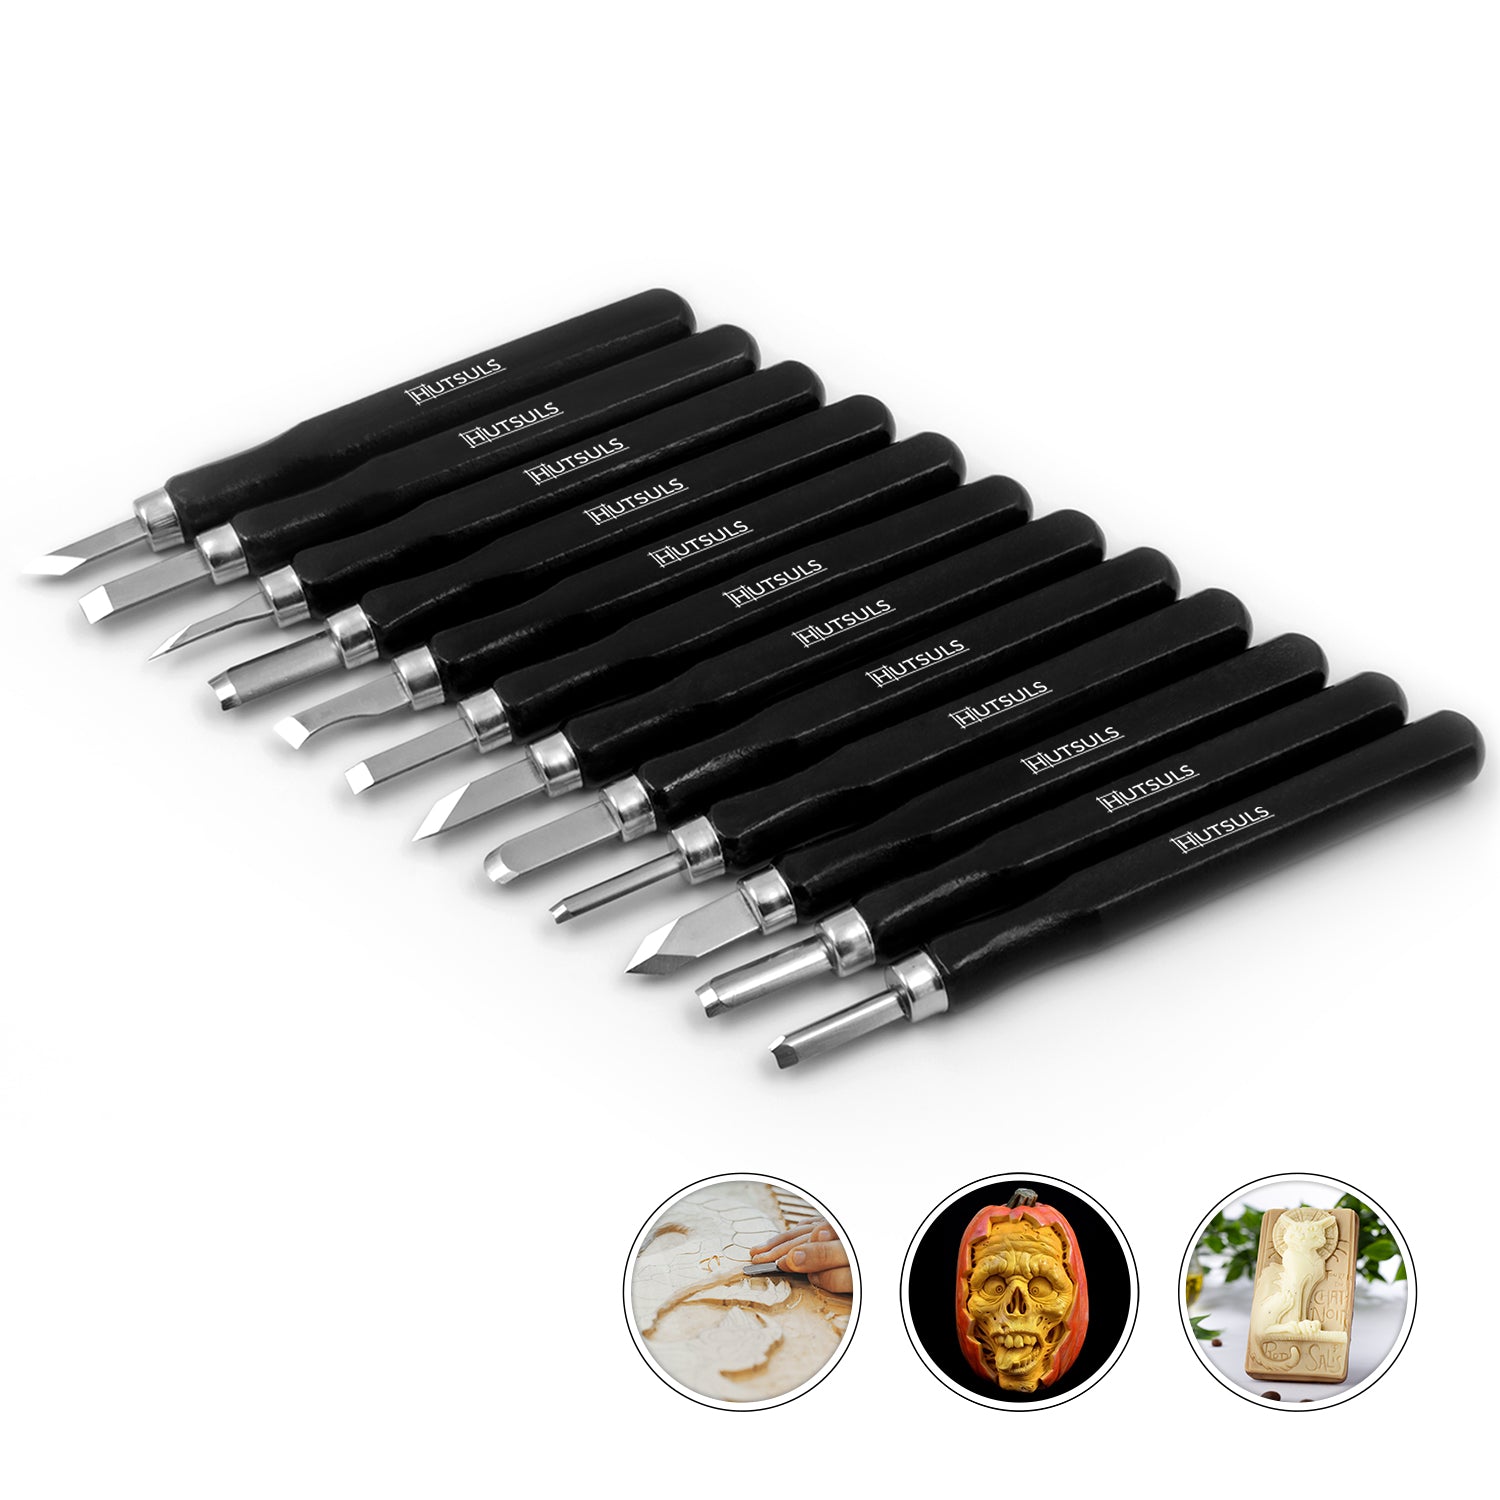 Wood Carving Tools, 5 PCS HSS Woodworking Tools for Iceland